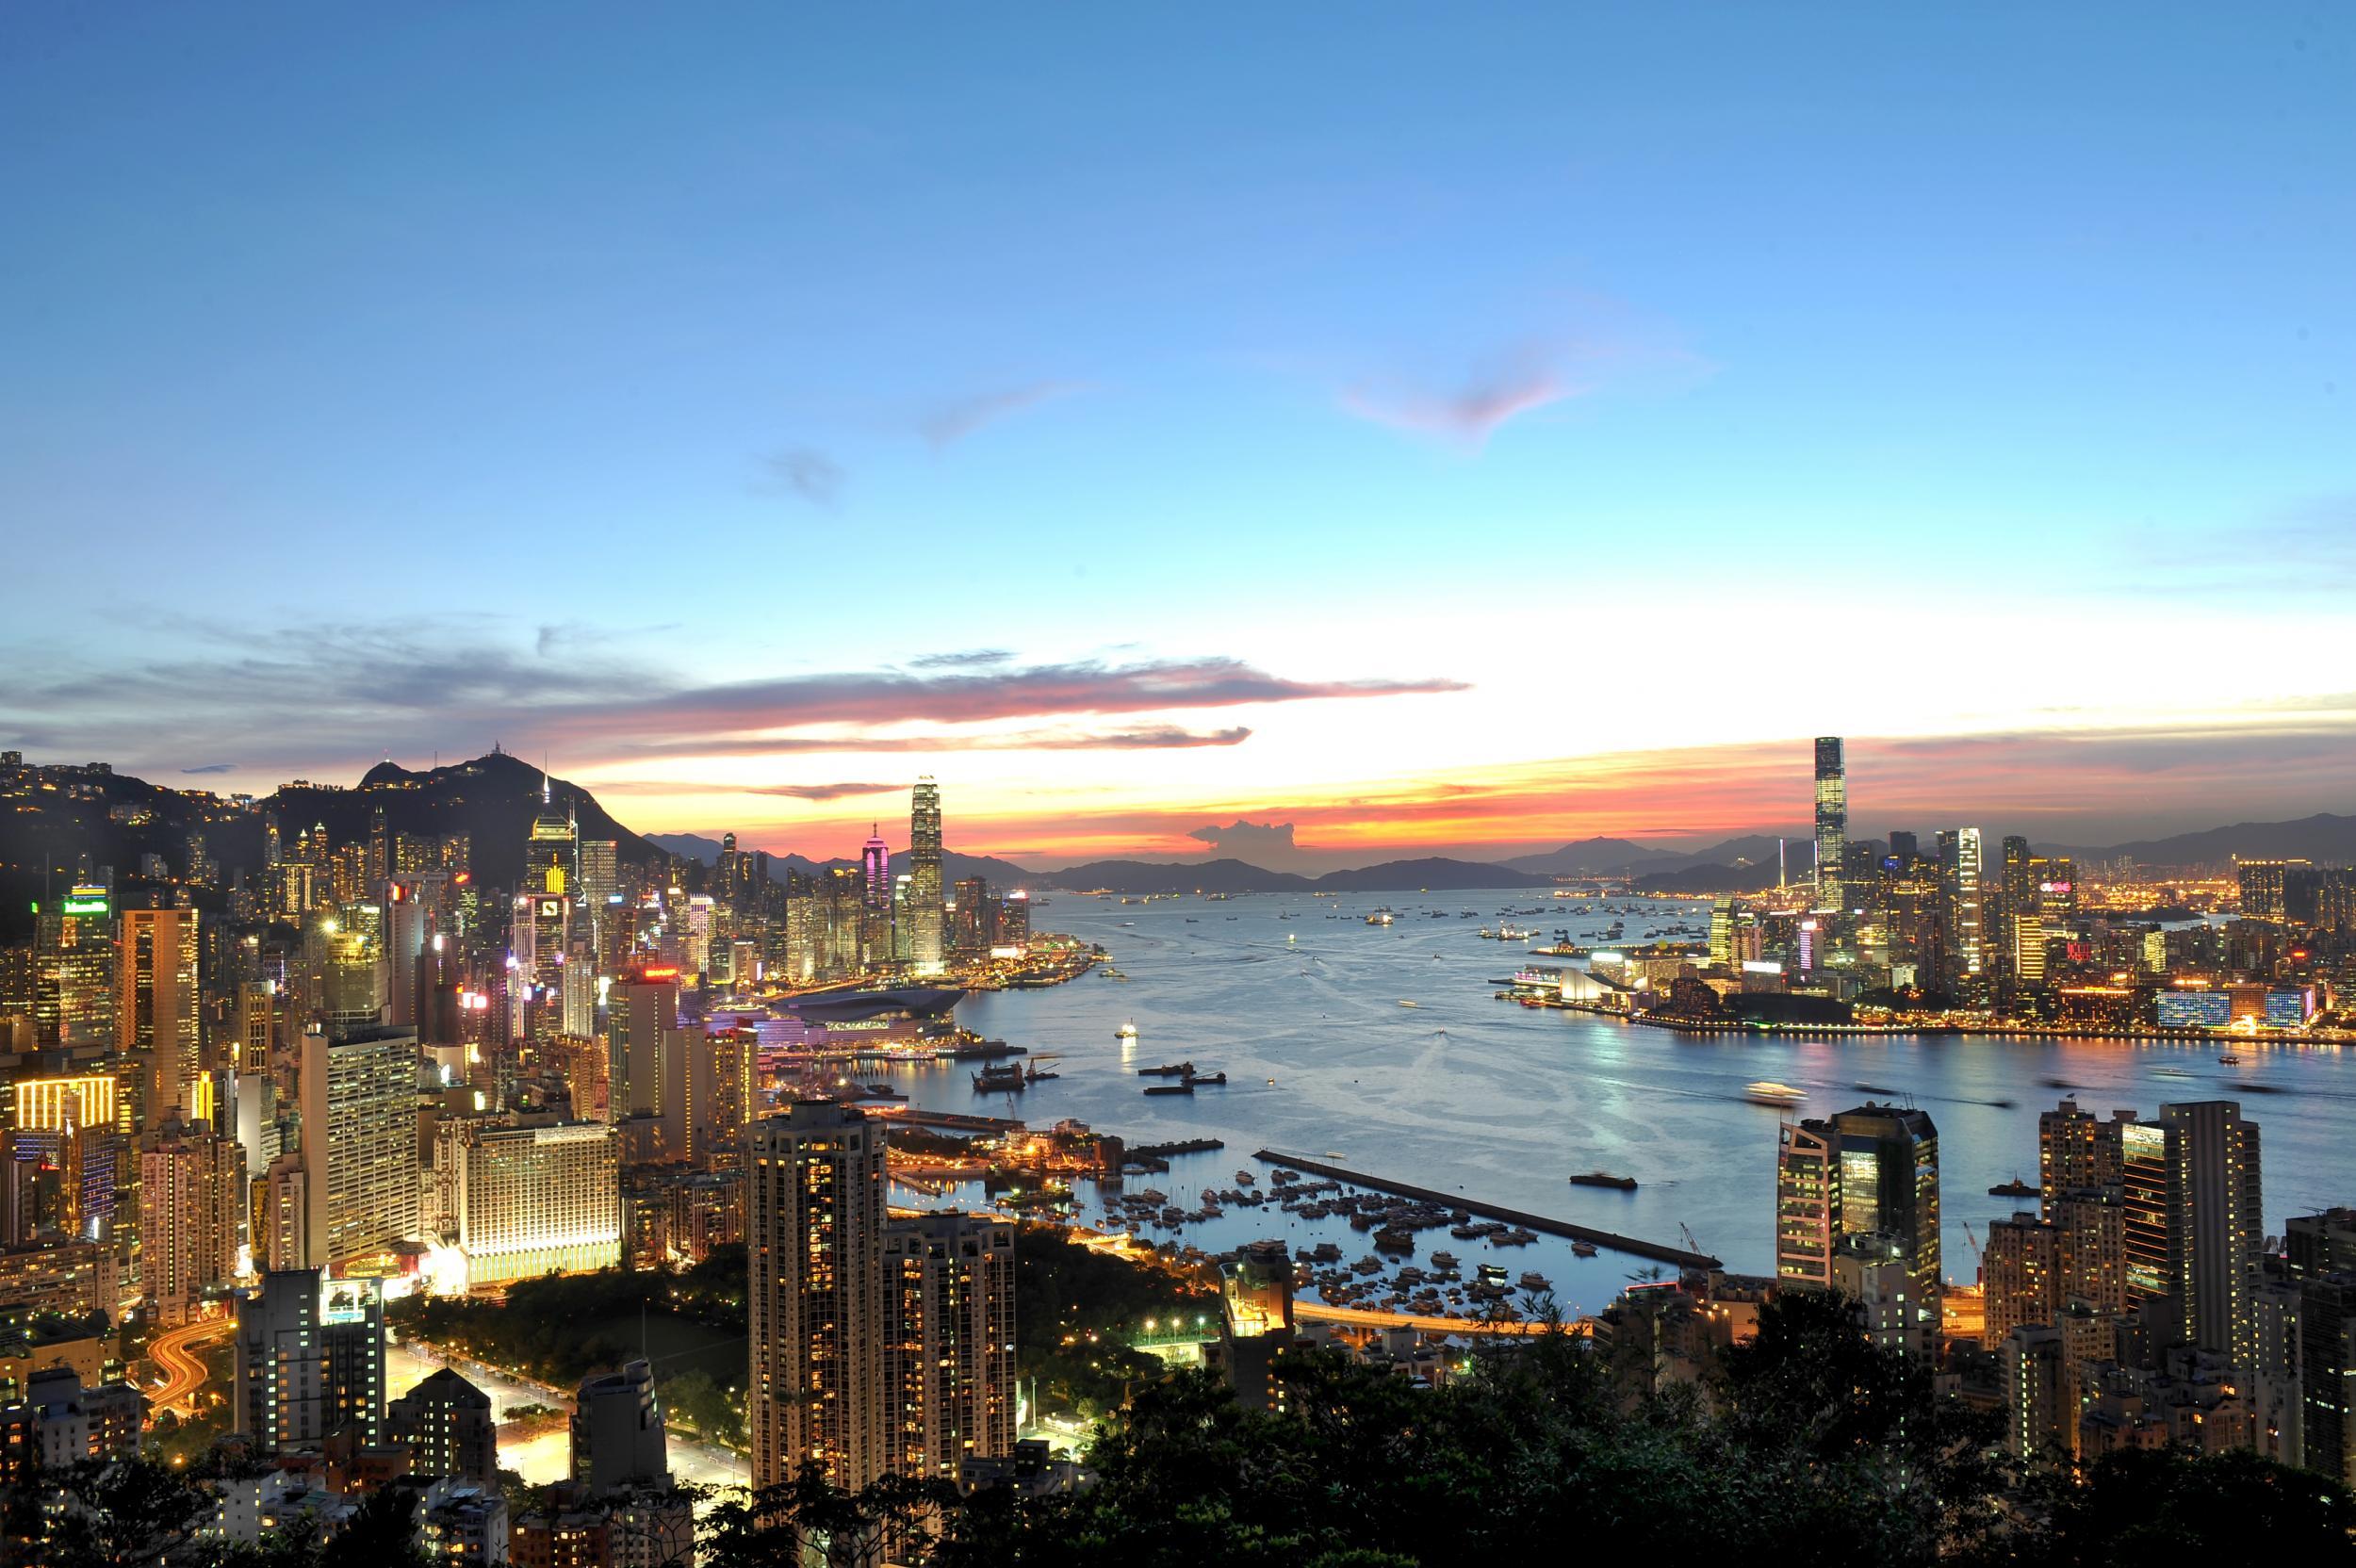 The breathtaking Hong Kong skyline is worth a trip alone